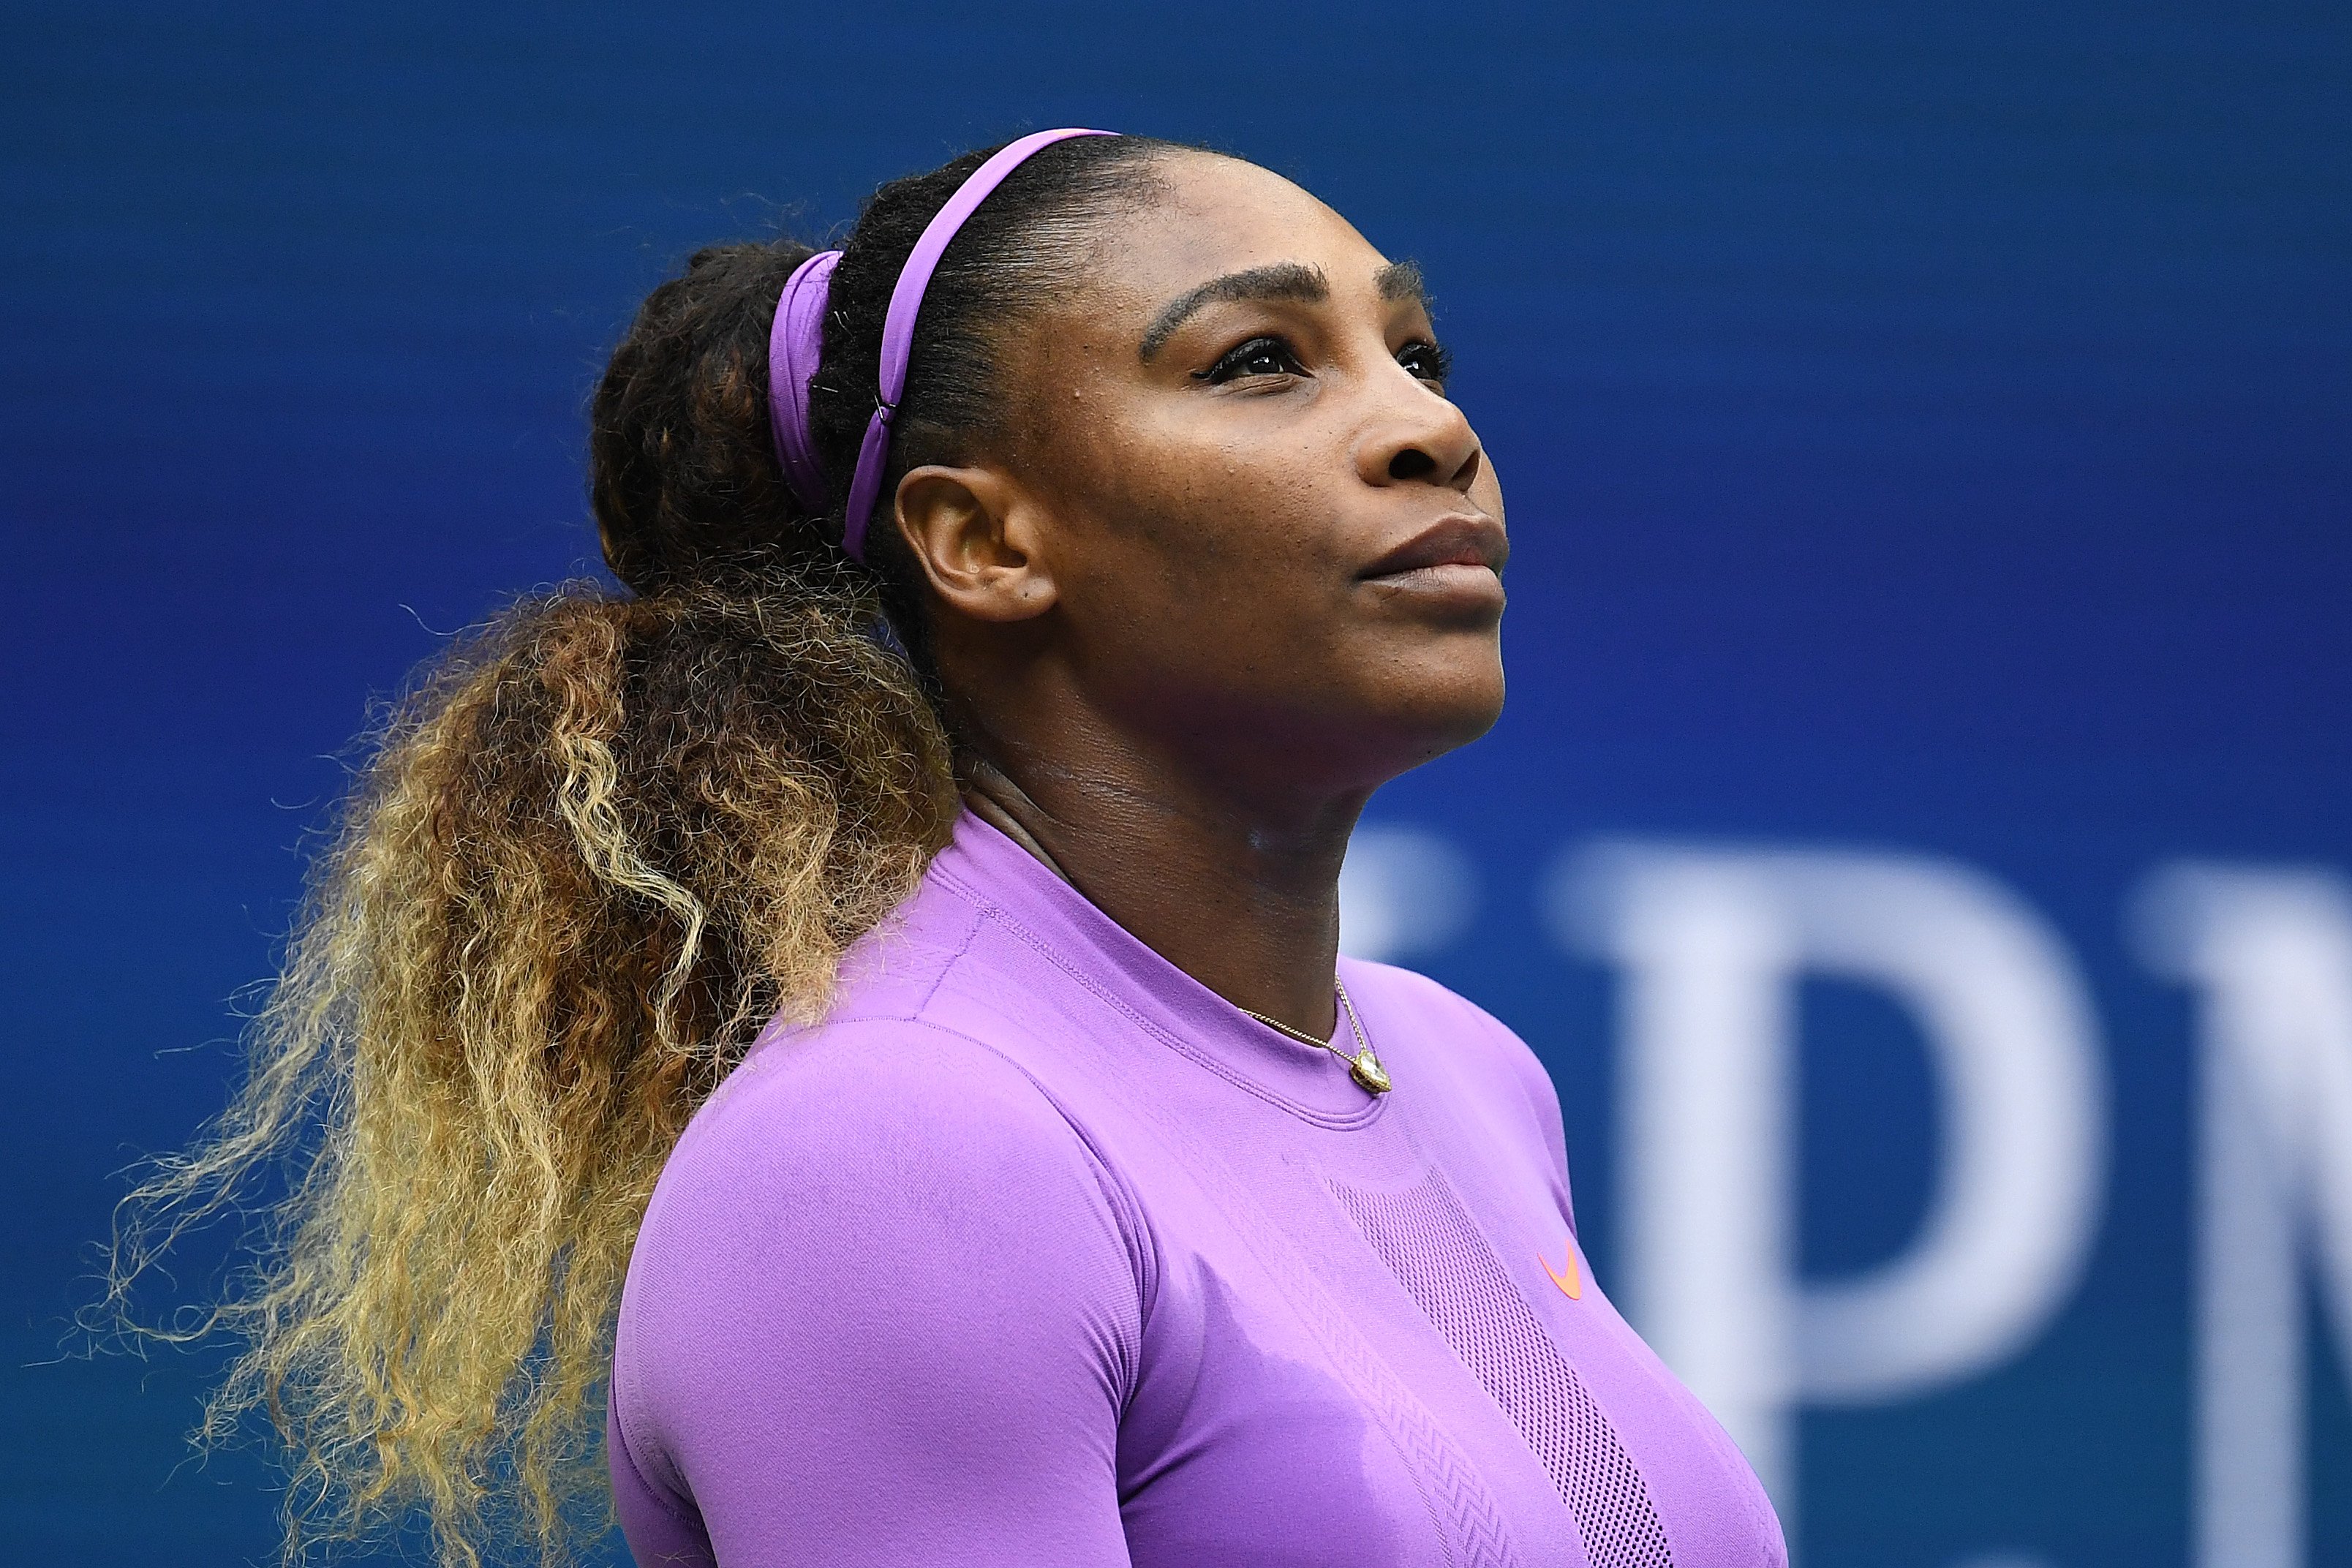 Serena Williams at the 2019 US Open in New York City | Source: Getty Images